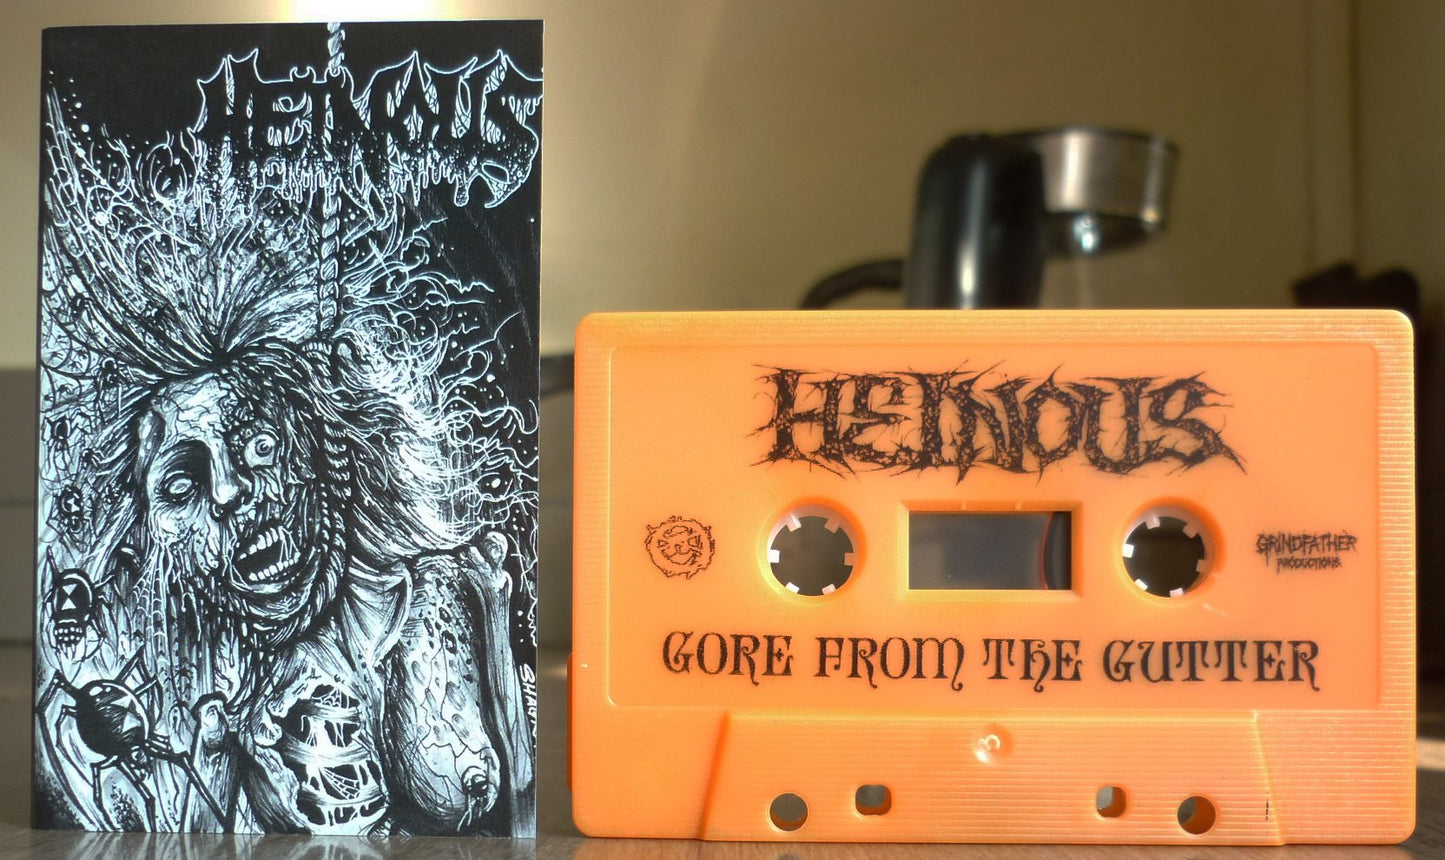 HEINOUS - Gore From The Gutter Tape